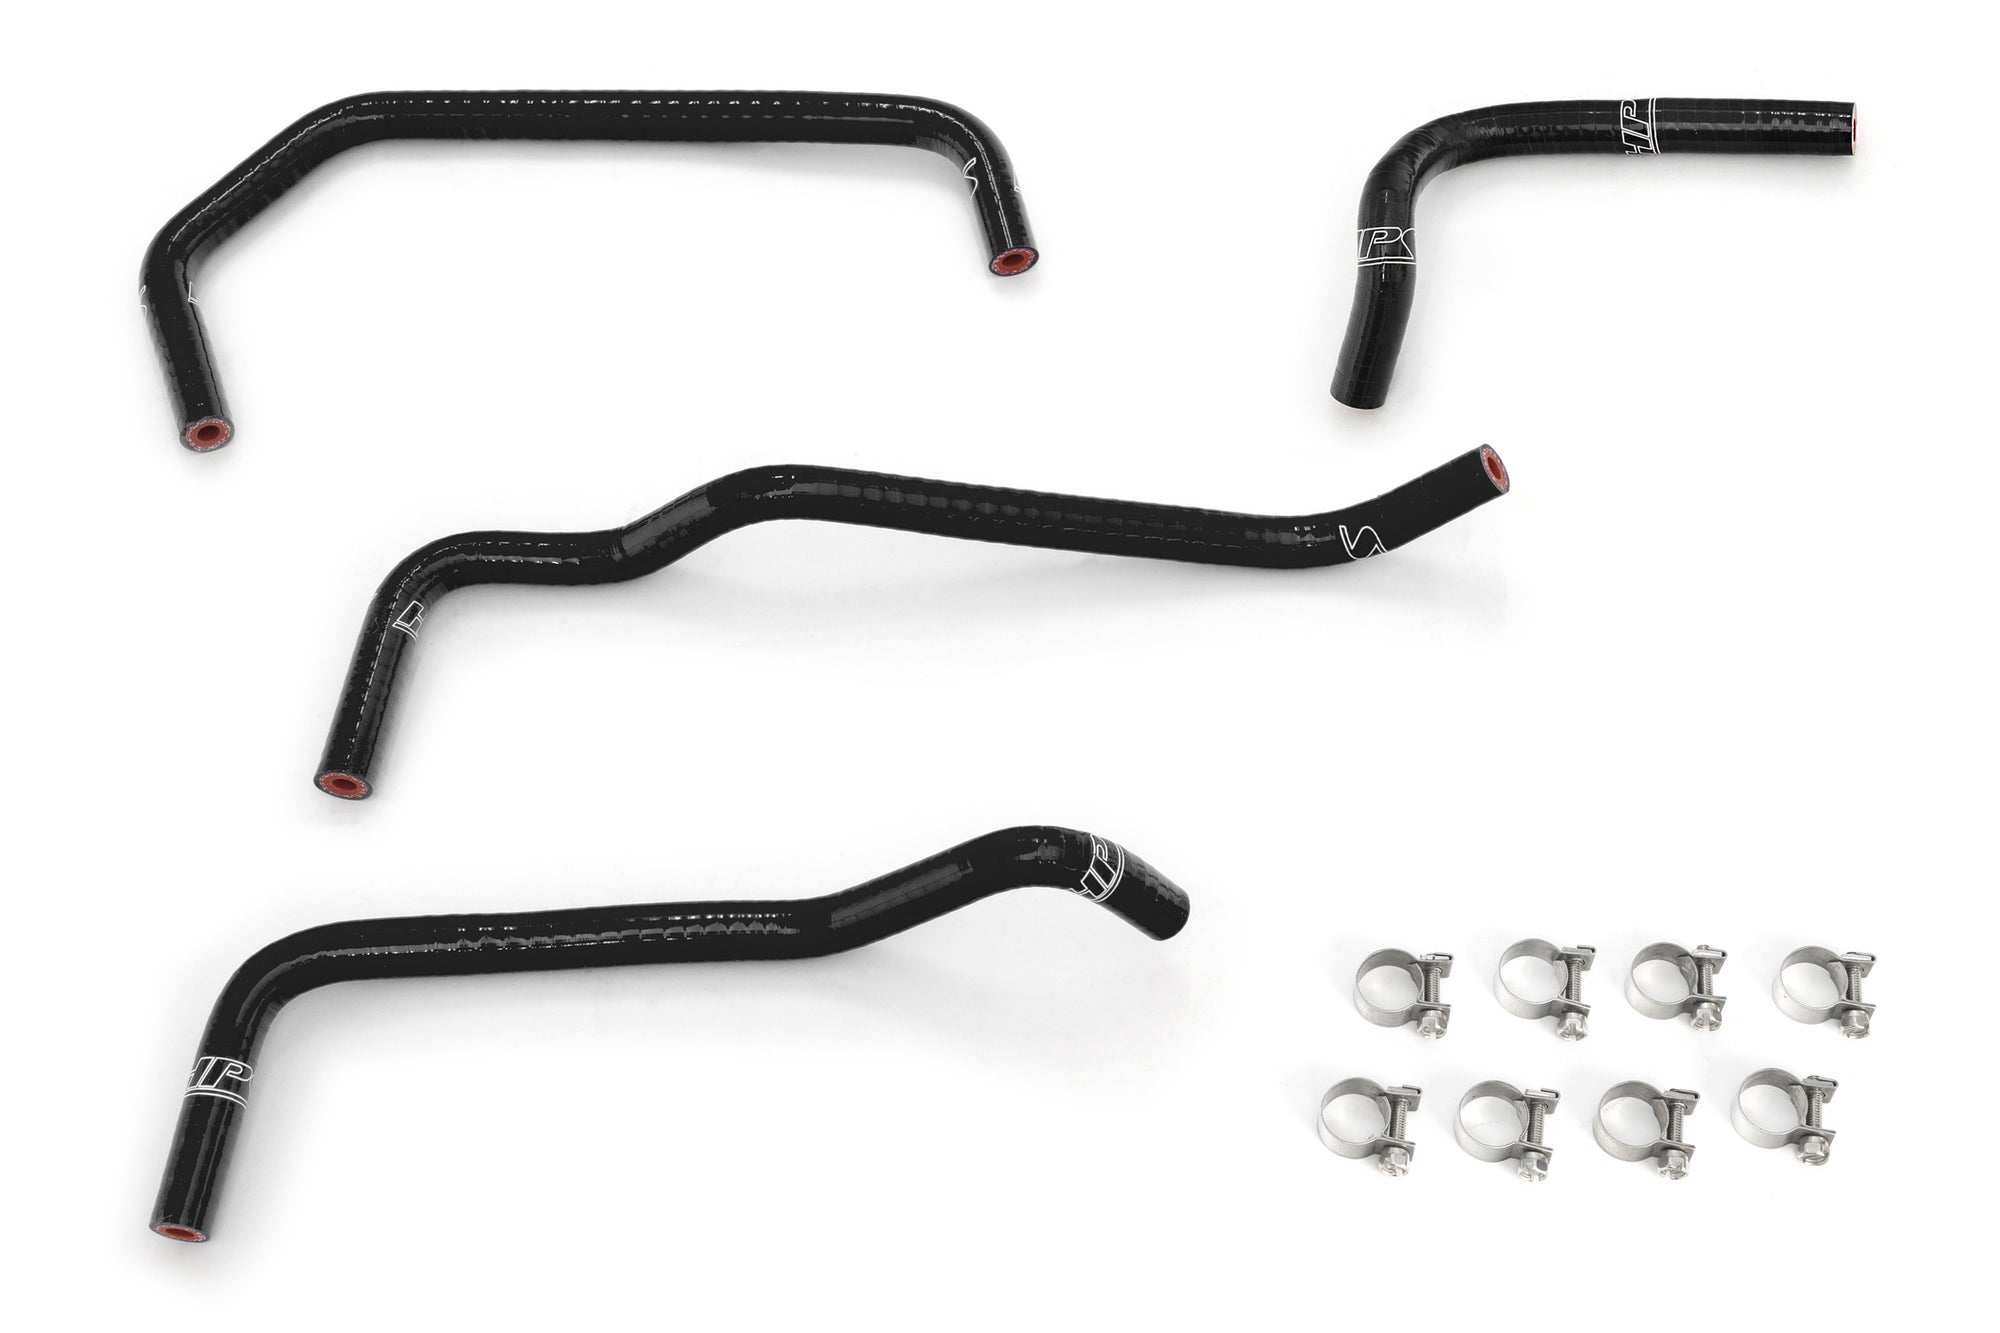 HPS Silicone Ancillary Coolant Hose Kit 57-2157-BLK replaces 99-00 Mazda Miata NB1 thermostat bypass, throttle body, air control valve, and oil cooler hoses